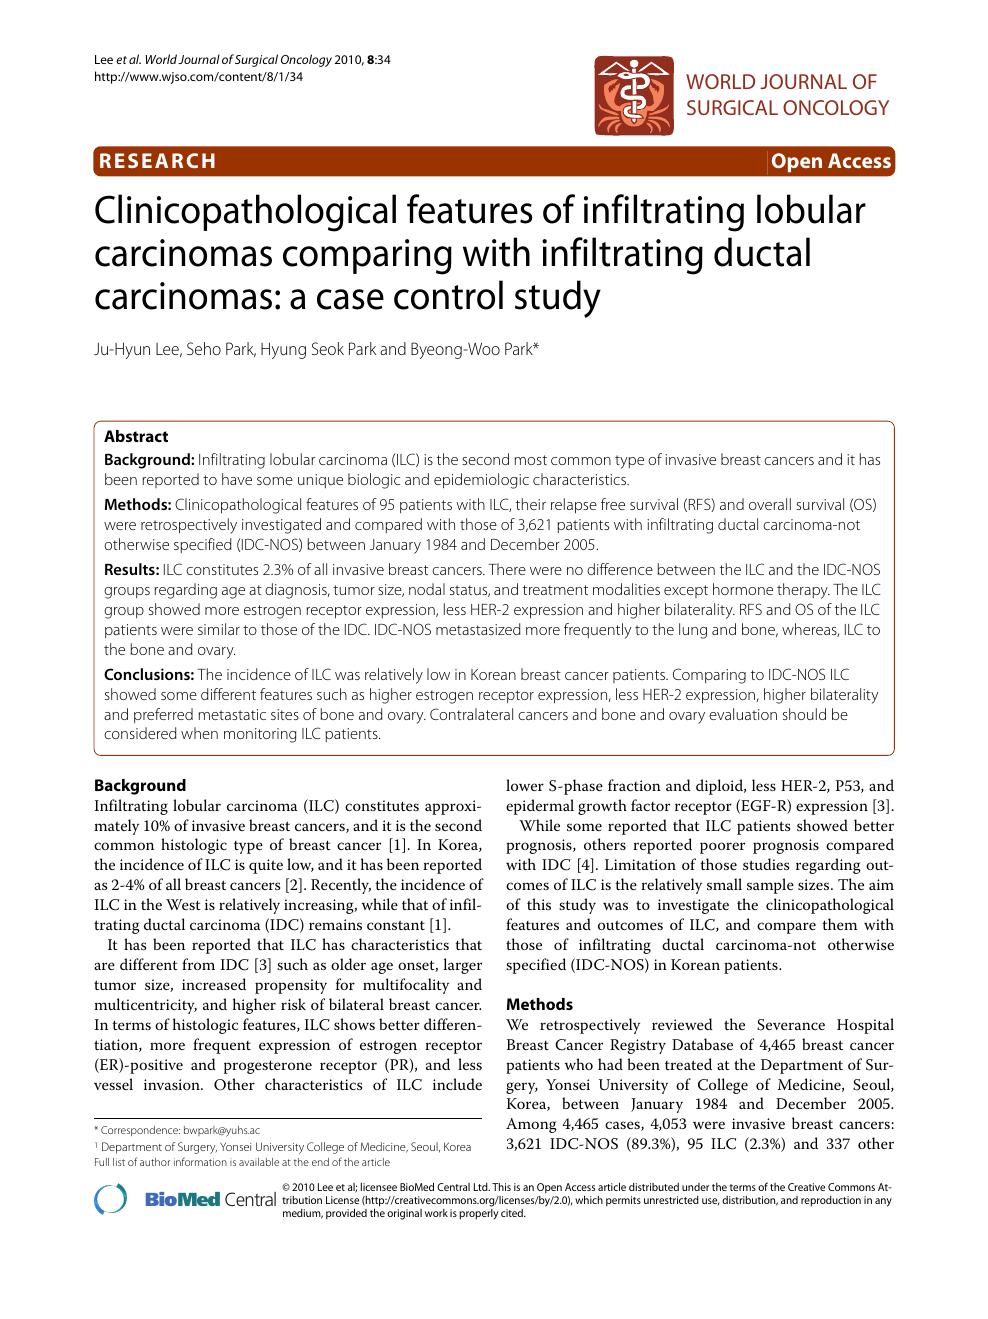 Clinicopathological Features Of Infiltrating Lobular Carcinomas Comparing With Infiltrating Ductal Carcinomas A Case Control Study Topic Of Research Paper In Clinical Medicine Download Scholarly Article Pdf And Read For Free On